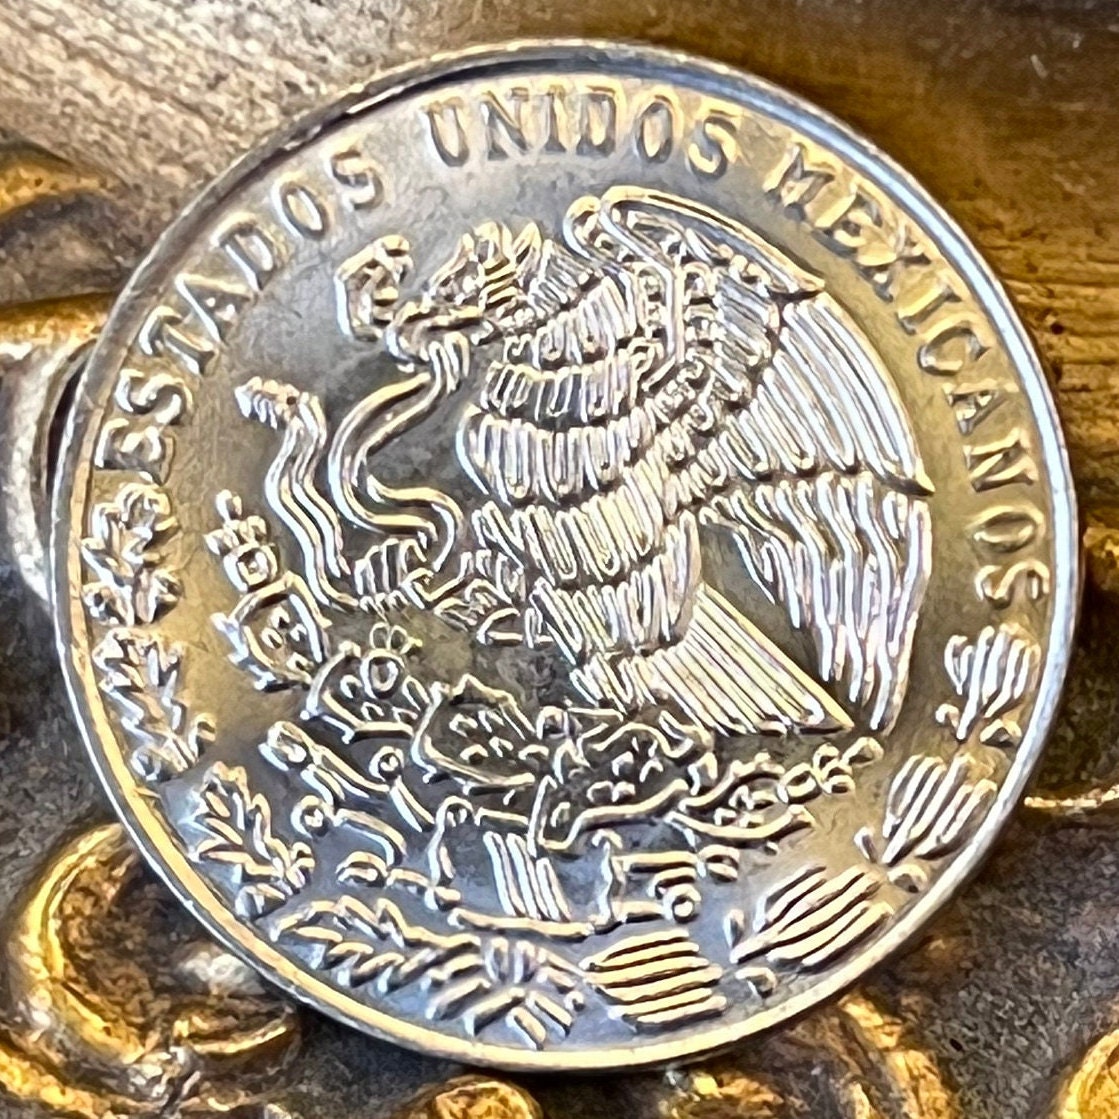 President Francisco Madero & Eagle with Snake 20 Centavos Mexico Authentic Coin Money for Jewelry and Craft Making